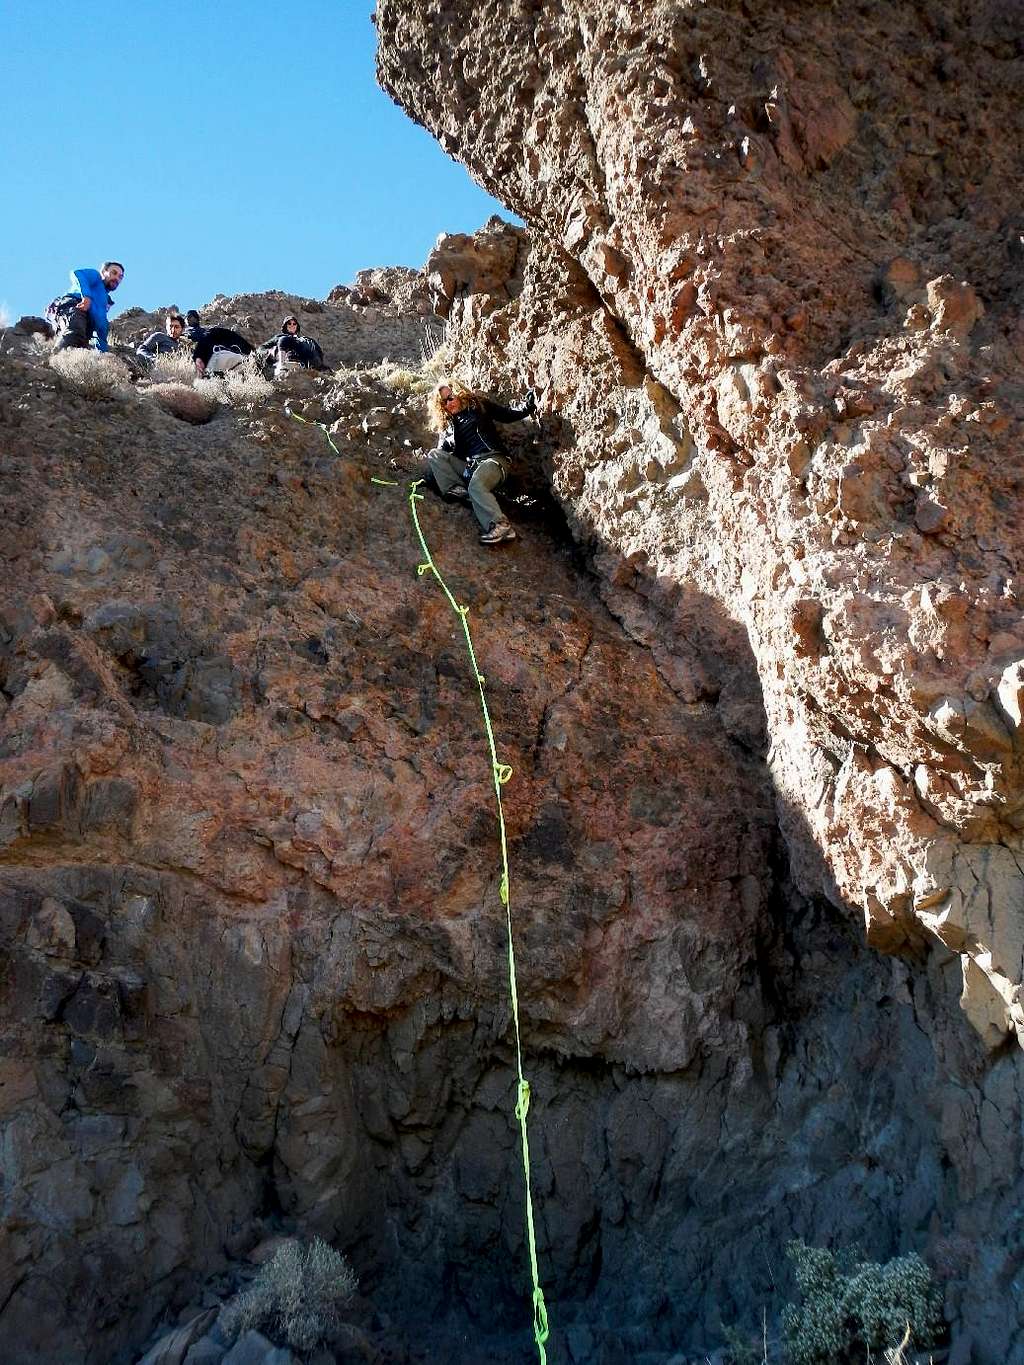 Downclimbing crux of Dove